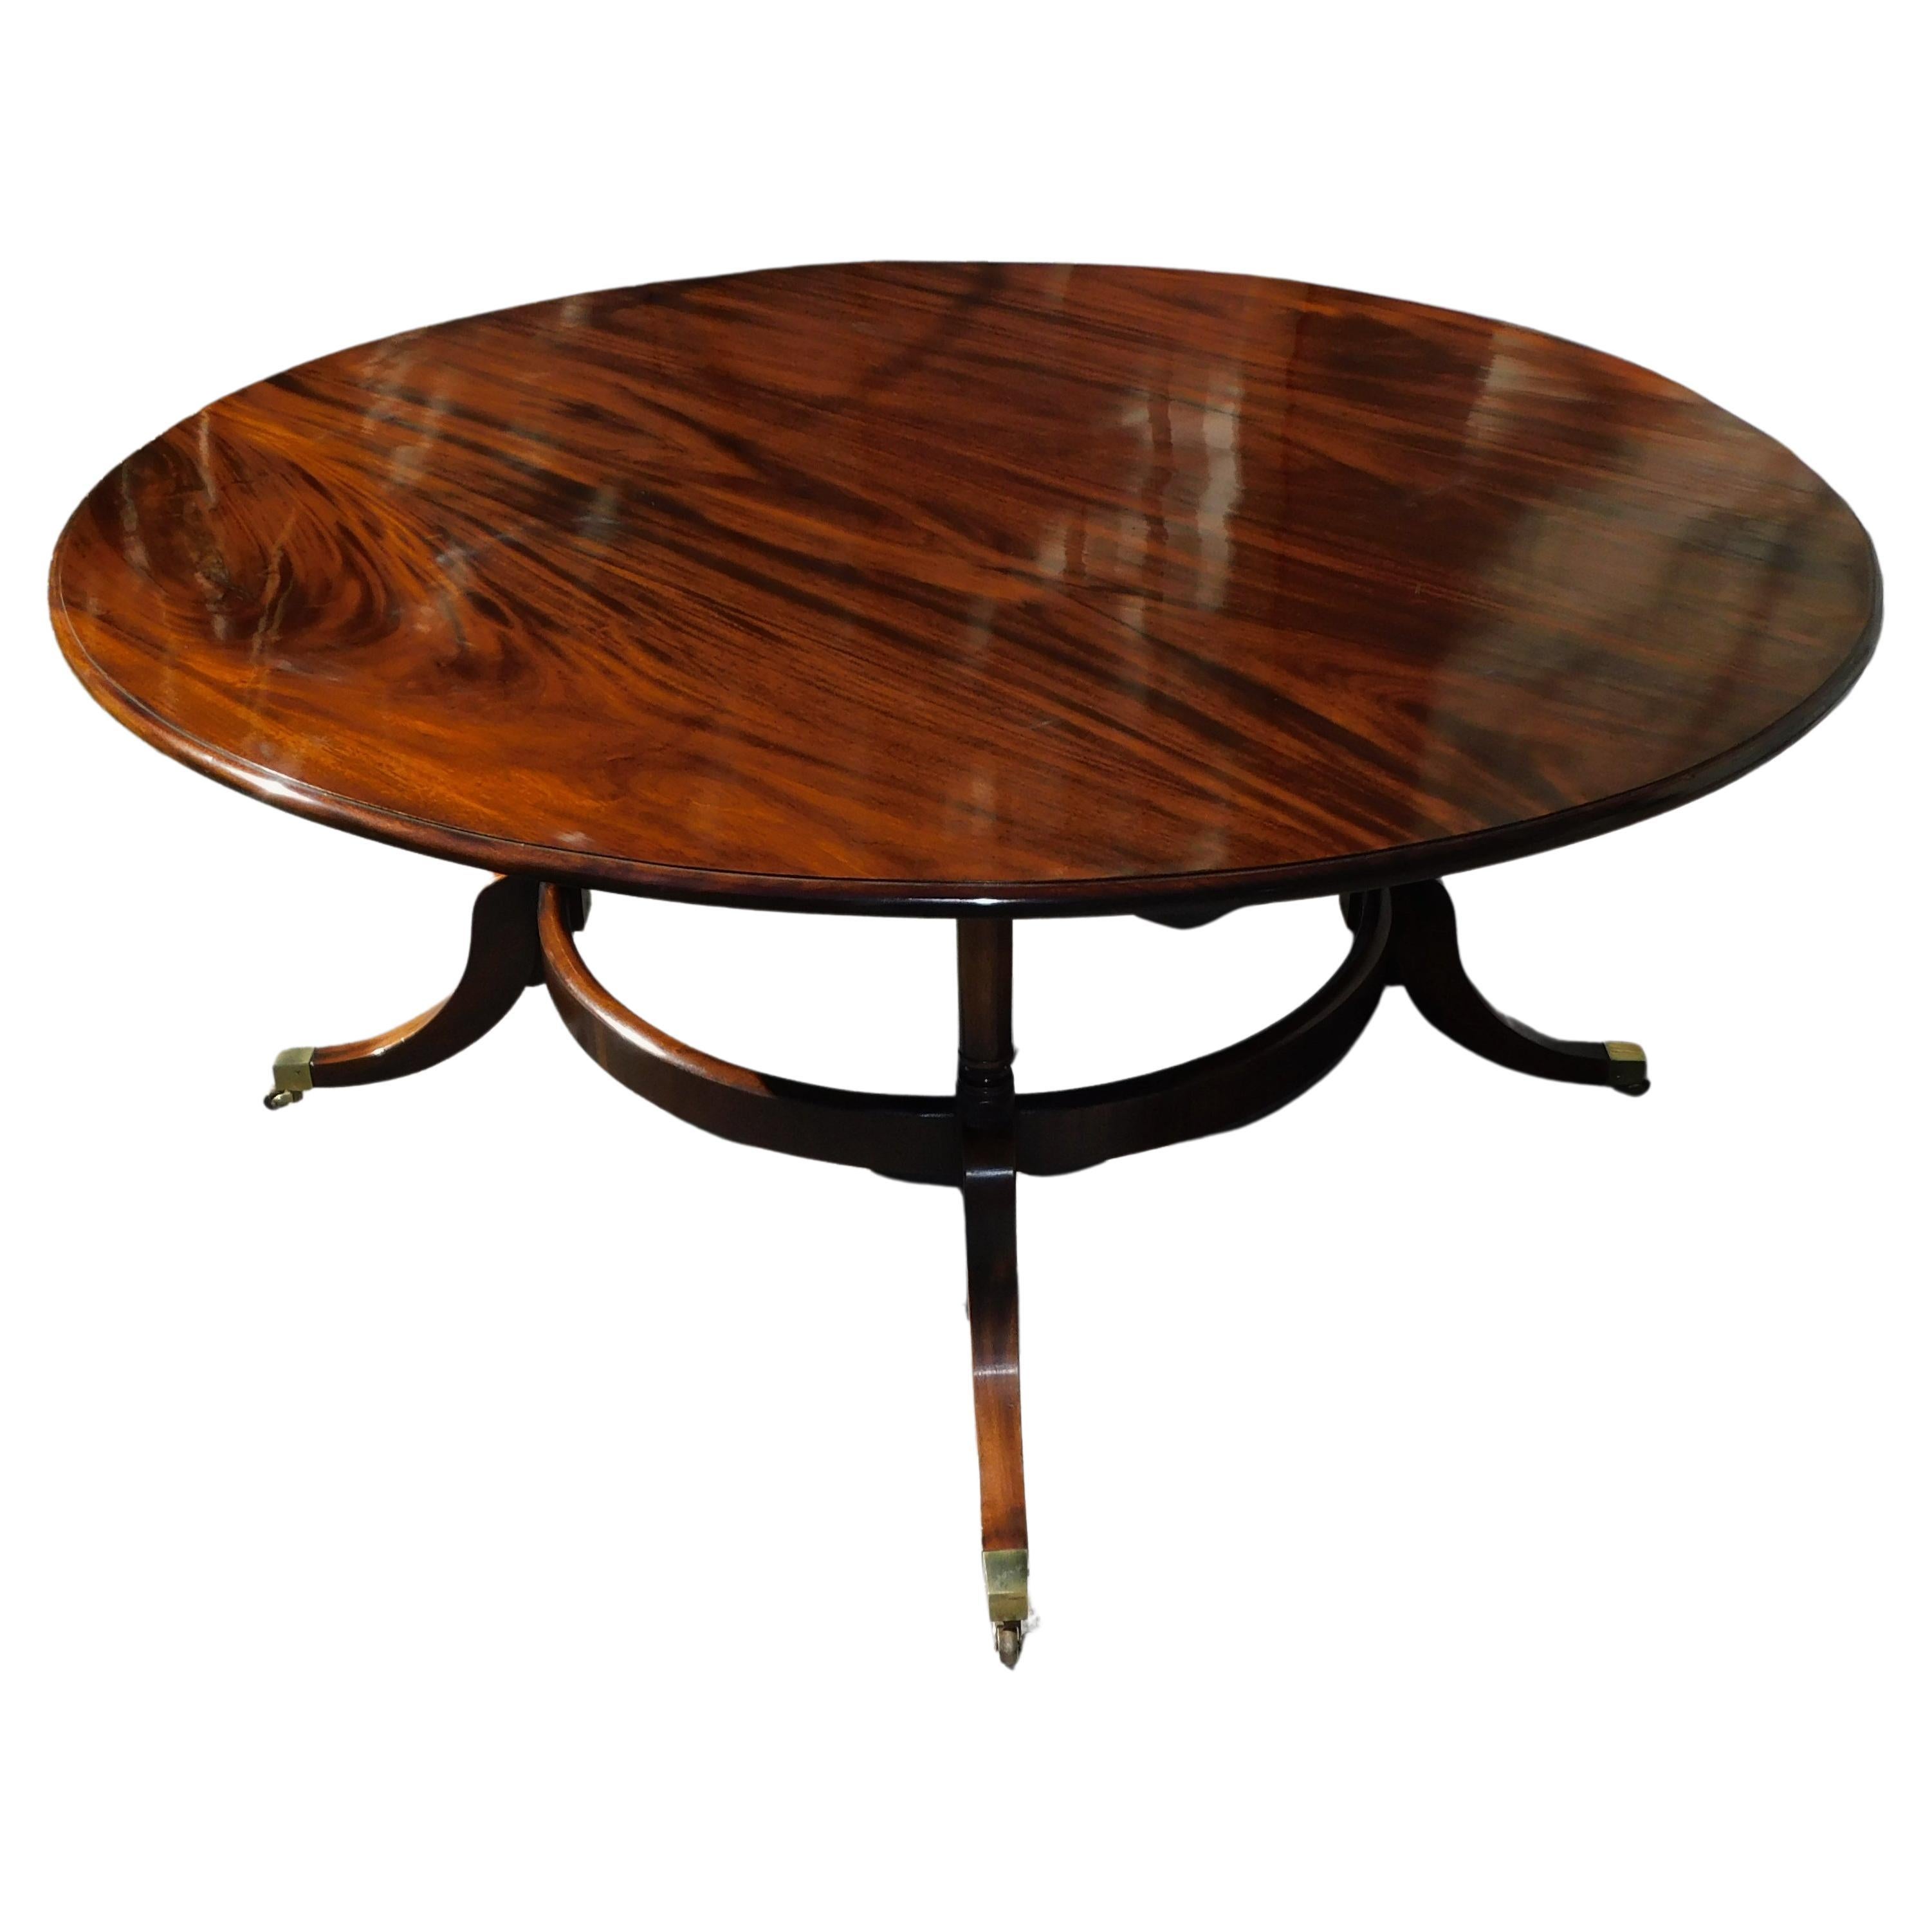 English Regency Mahogany Circular Dining Table with Splayed Legs on Casters 1850